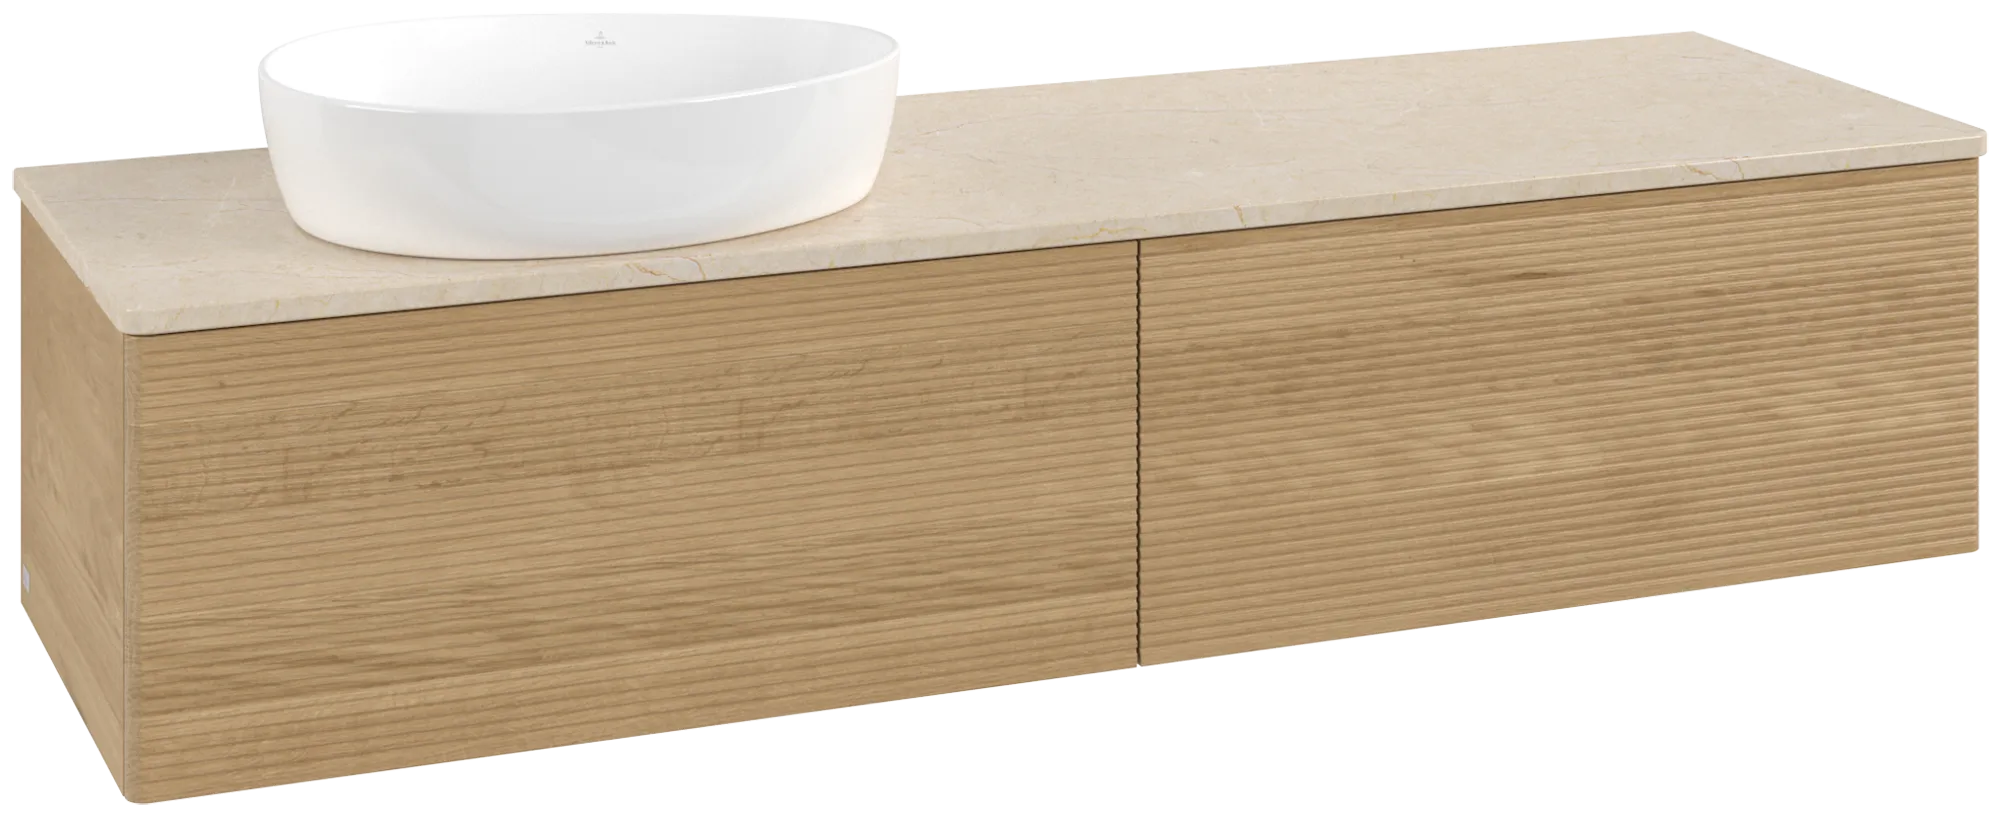 Obrázek VILLEROY BOCH Antao Vanity unit, with lighting, 2 pull-out compartments, 1600 x 360 x 500 mm, Front with grain texture, Honey Oak / Botticino #L37113HN